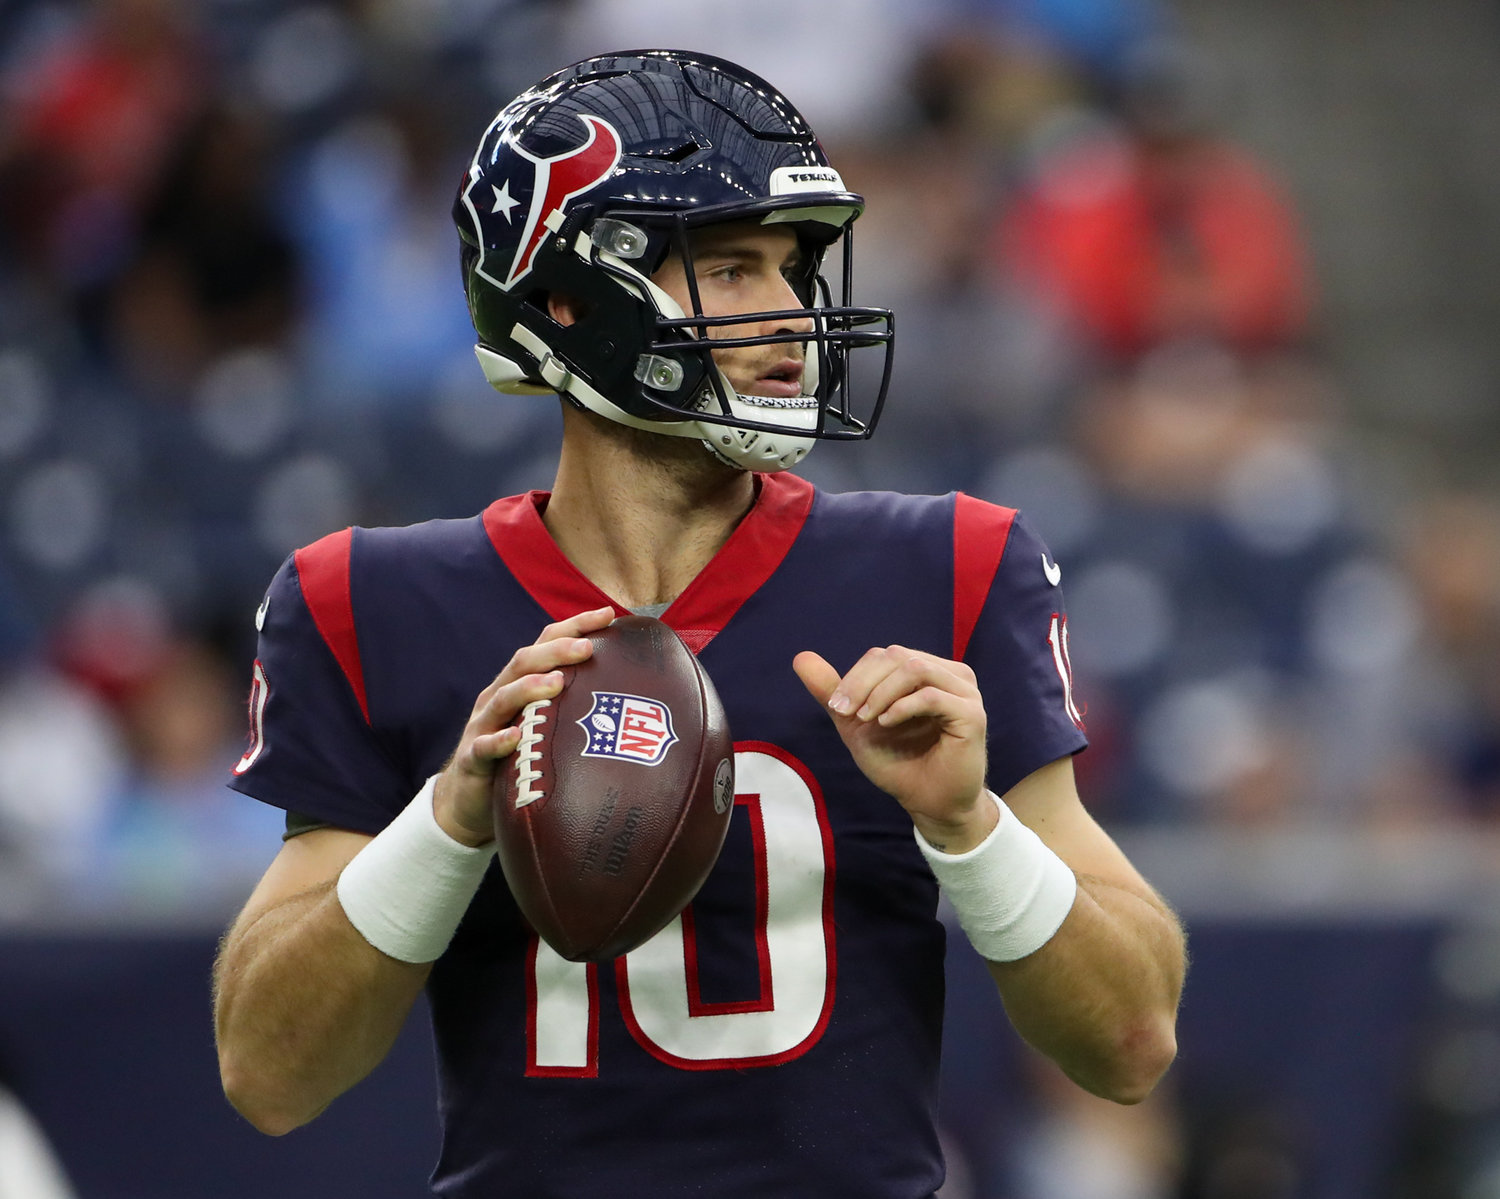 Houston Texans quarterback Davis Mills (10) looks to pass during an NFL game between the Texans and the Titans on Jan. 9, 2022 in Houston, Texas. The Titans won, 28-25.